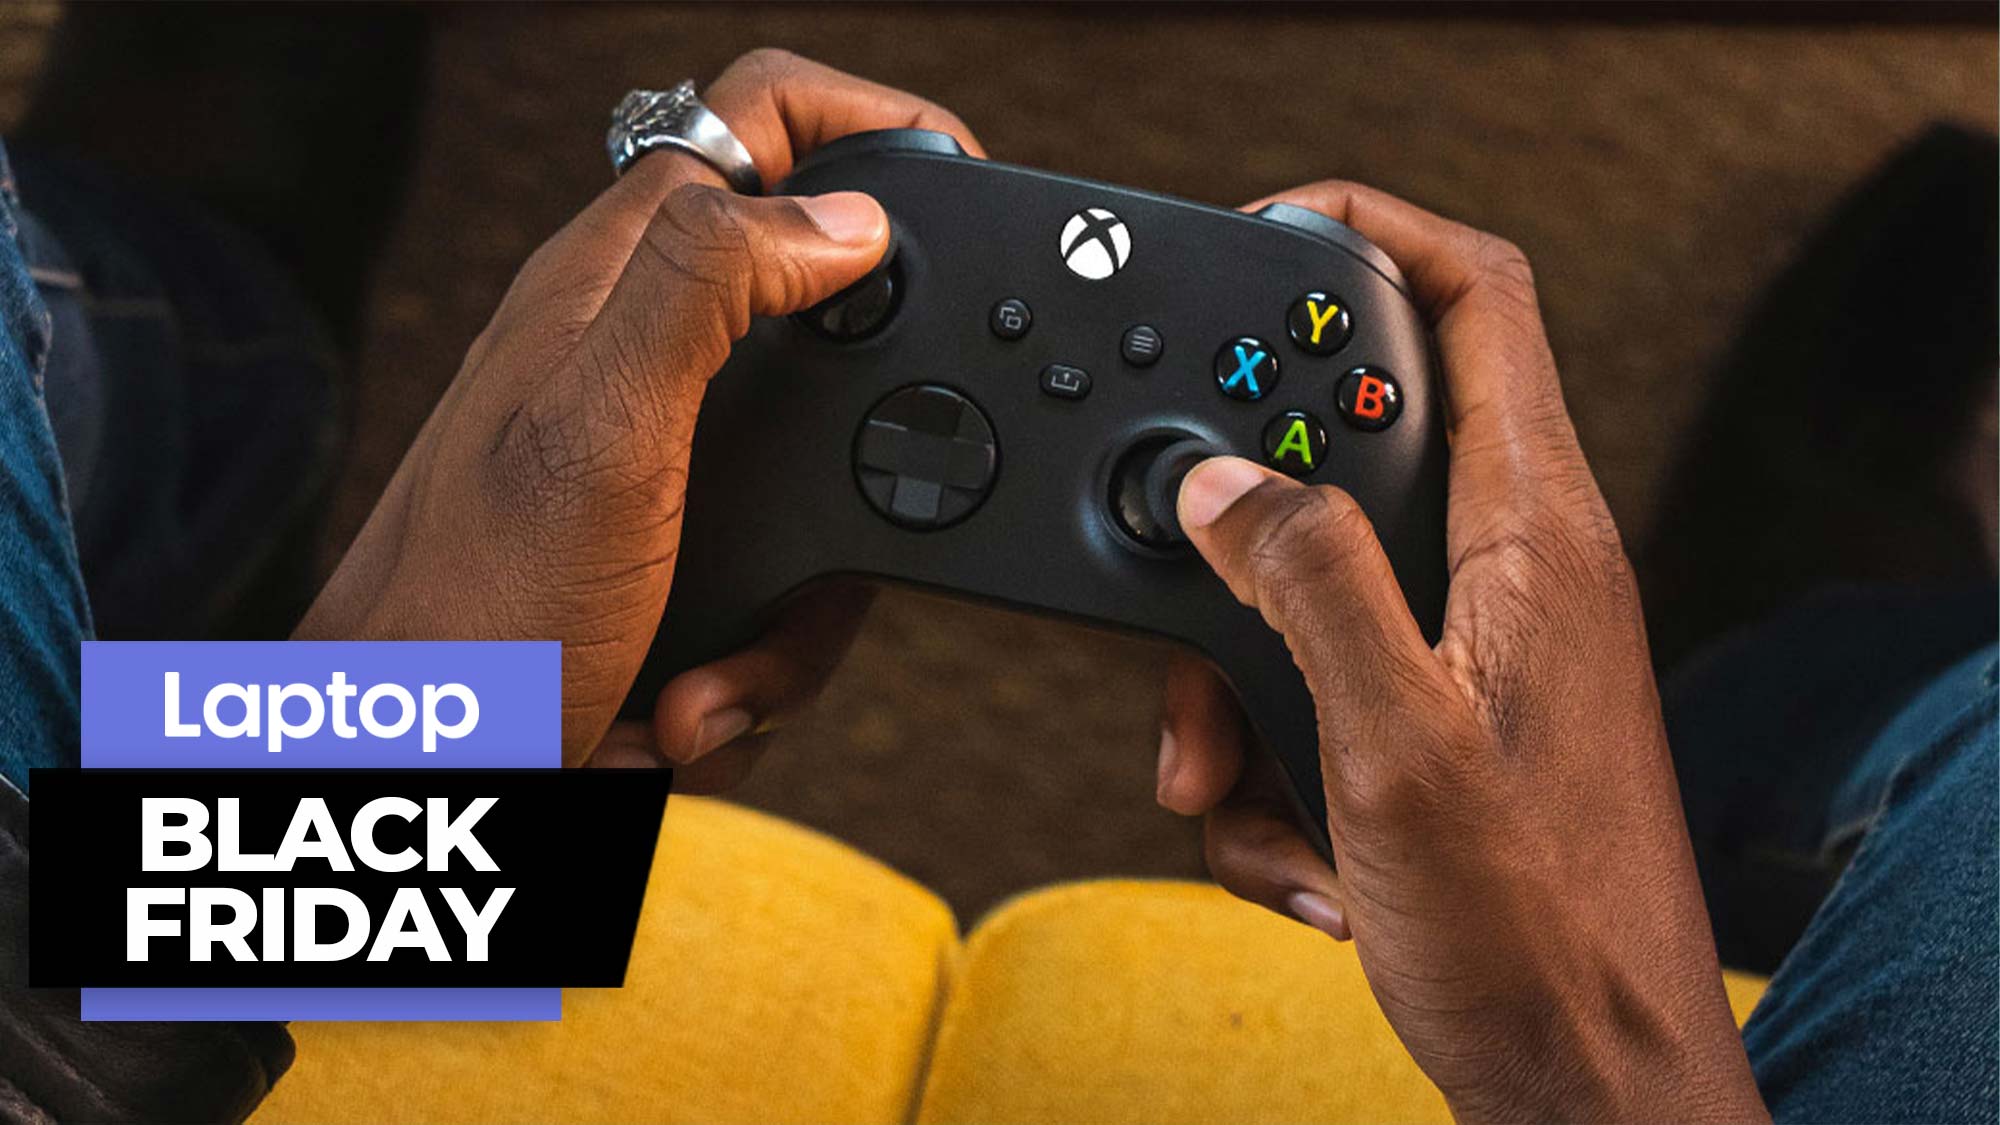 Xbox Wireless Controller Black Friday deal takes 10 off Microsoft's